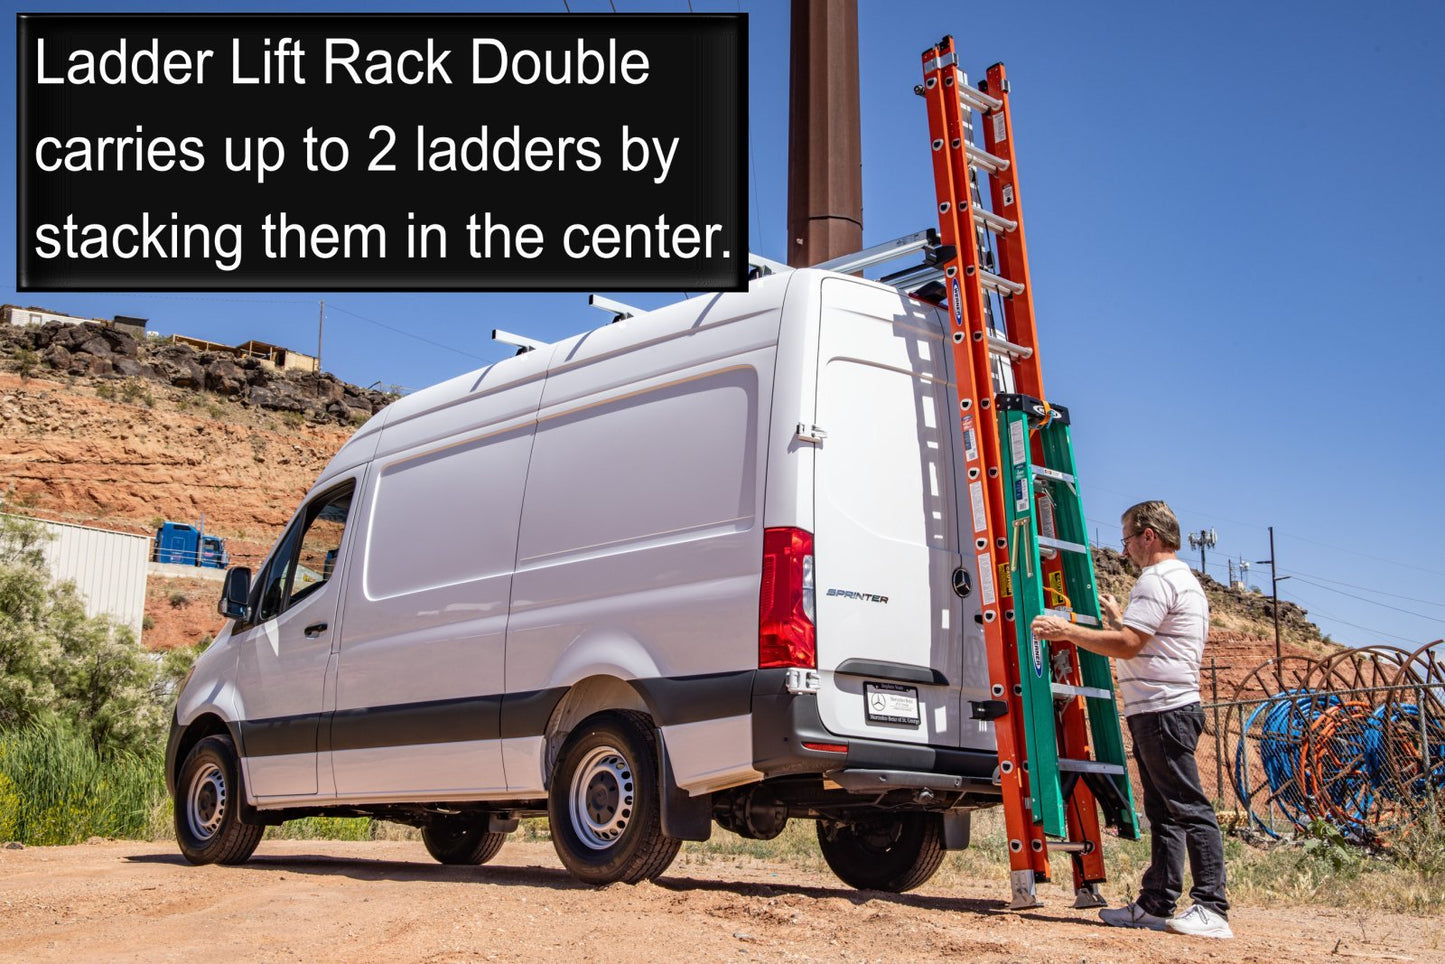 drop down ladder rack for 2 ladders, rear view